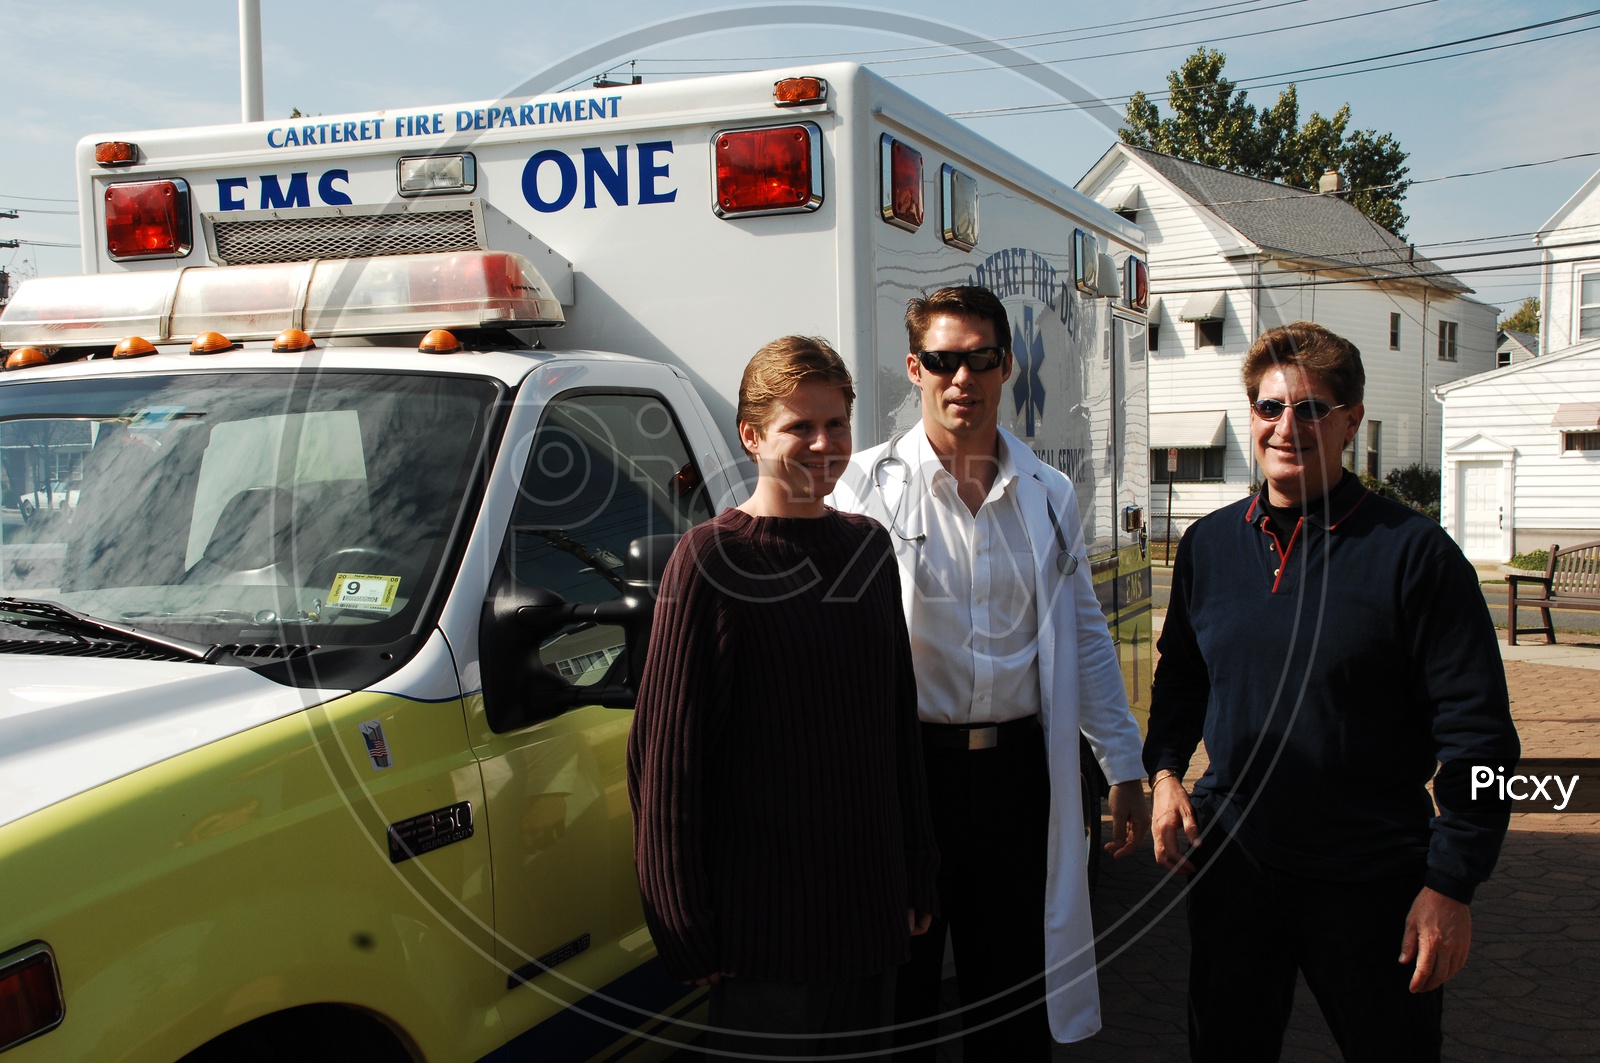 People and a doctor standing at the ambulance